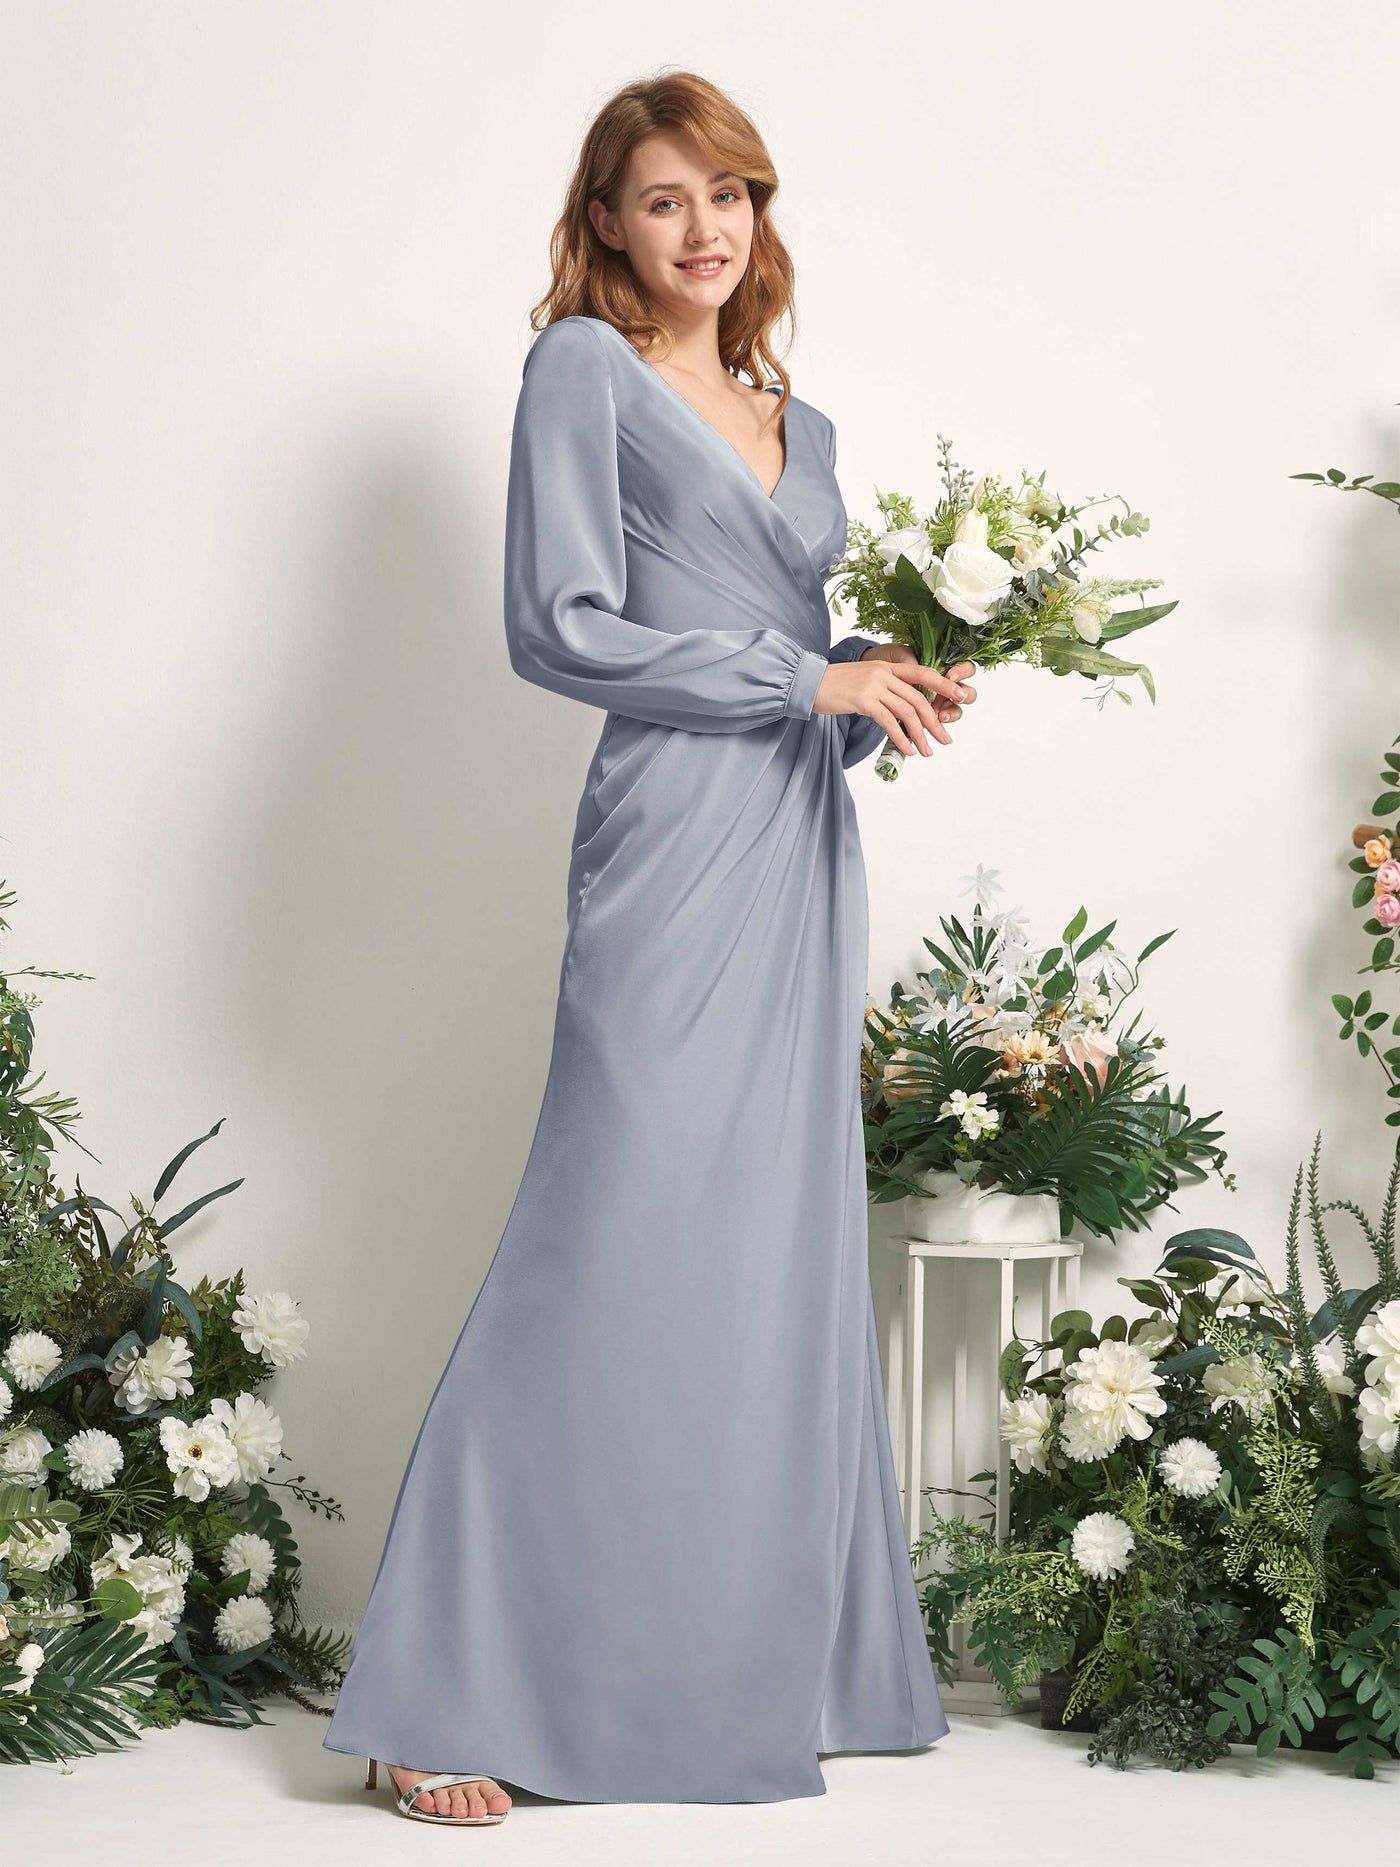 Dusty Blue Bridesmaid Dresses Bridesmaid Dress Ball Gown Satin V-neck Full Length Long Sleeves Wedding Party Dress (80225178)#color_dusty-blue